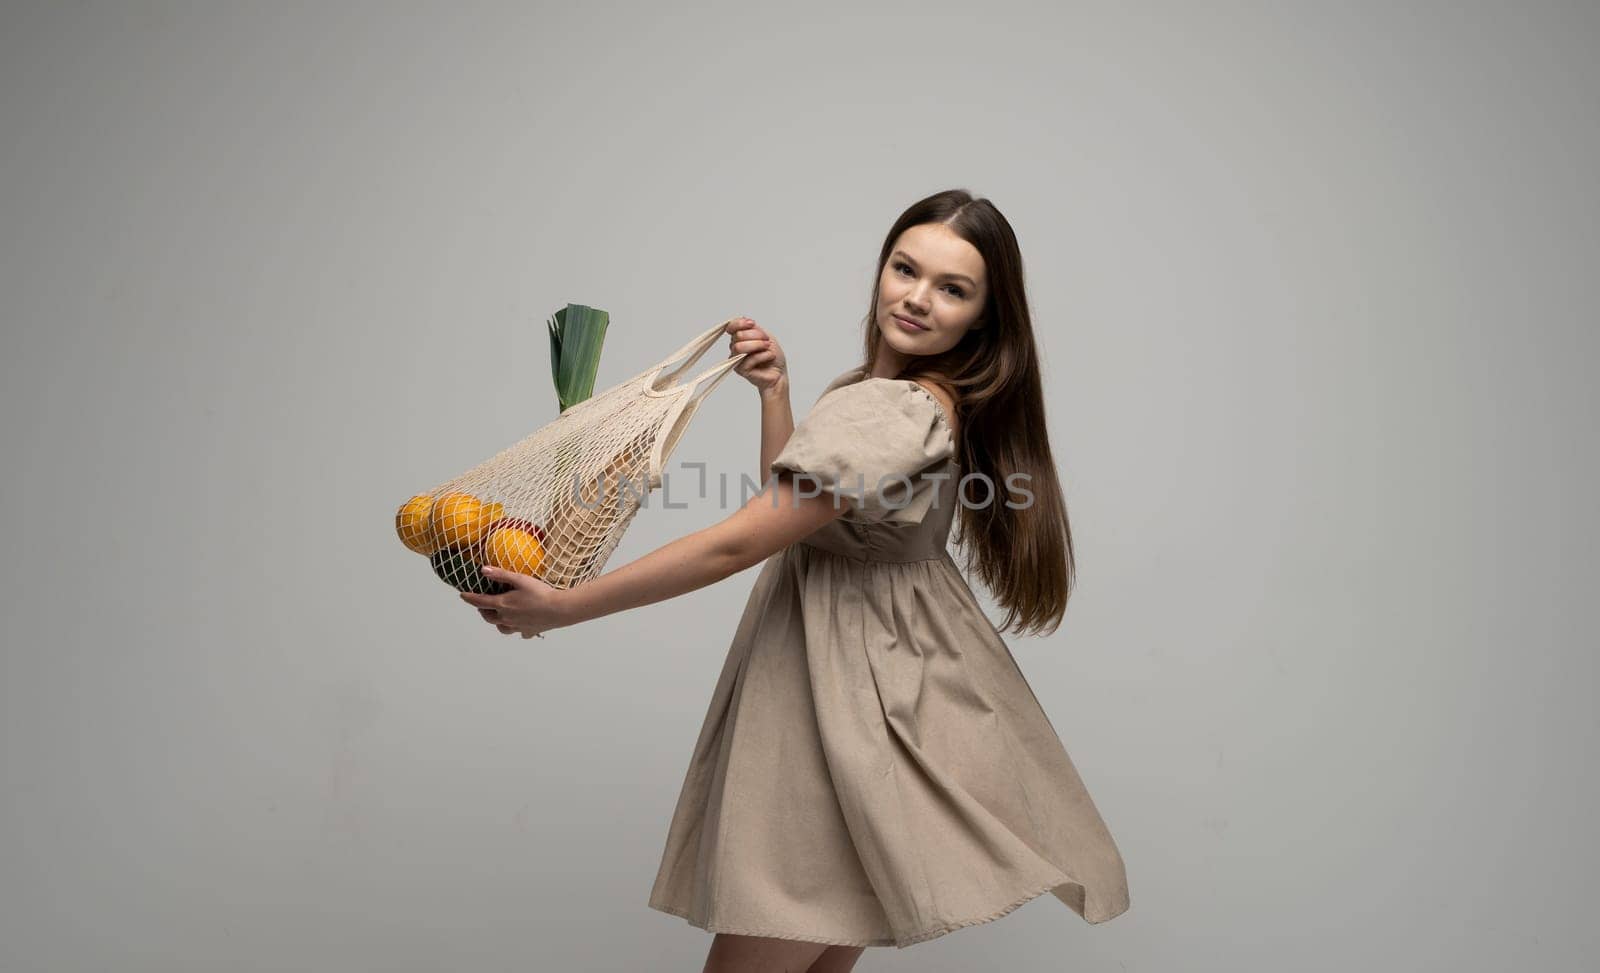 Young woman in a summer dress holding reusable cotton shopping mesh bag with groceries from a market. Concept of no plastic. Zero waste, plastic free. Eco friendly concept. Sustainable lifestyle